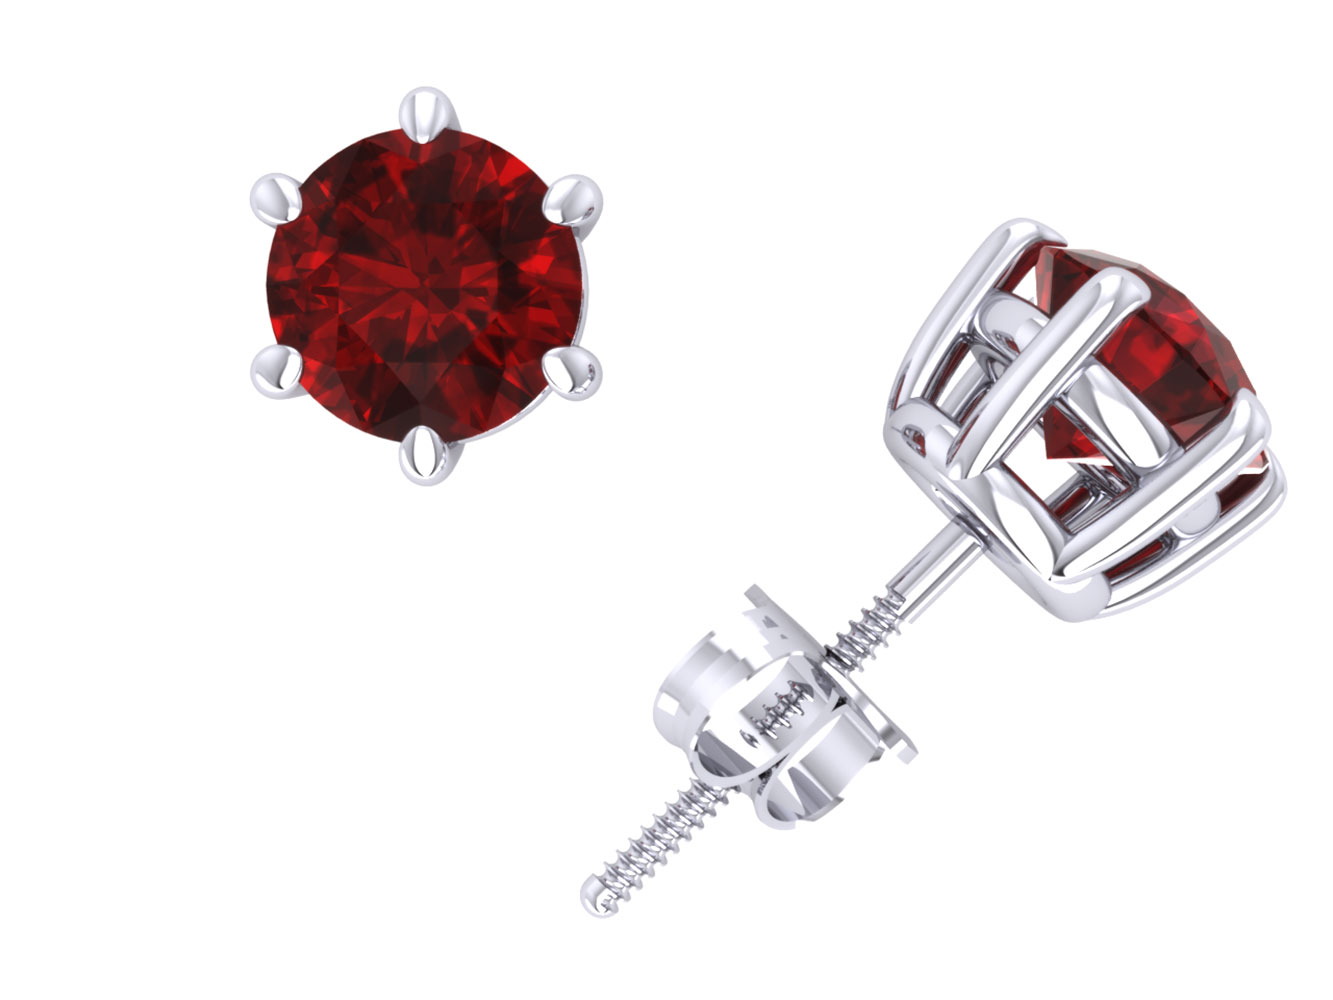 Jewel We Sell Genuine 1.00Carat Round Cut Ruby Basket Stud Earrings 14k White or Yellow Gold Prong AAA Quality